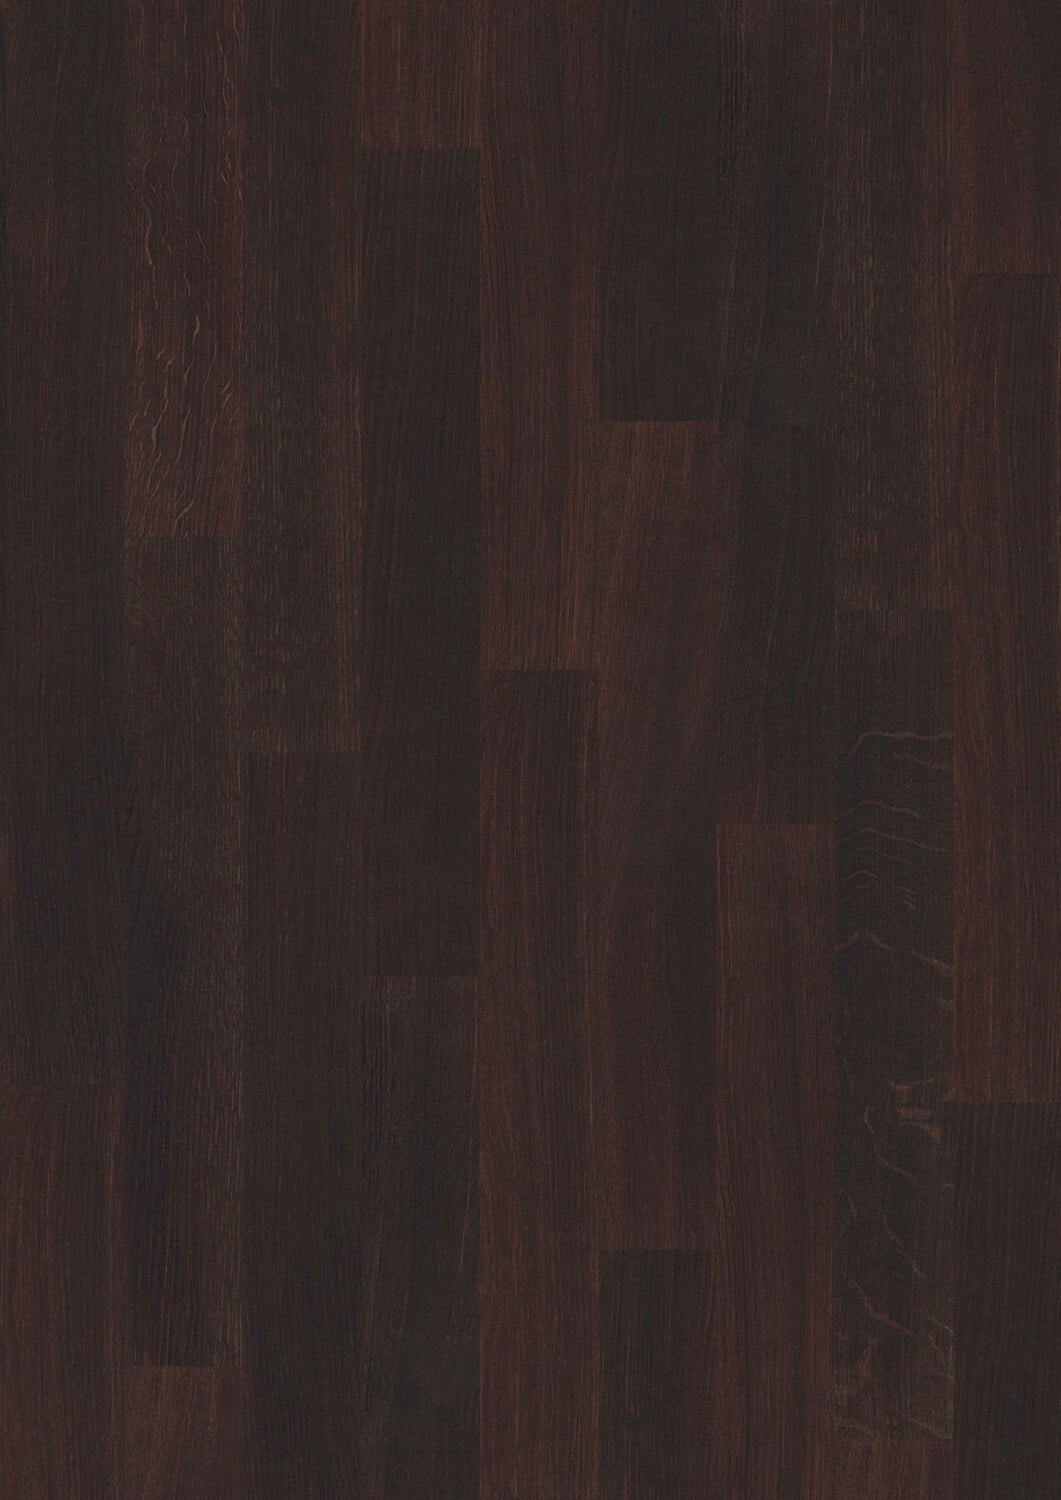 Smoked oak Elegance, oiled oiled Finished parquet